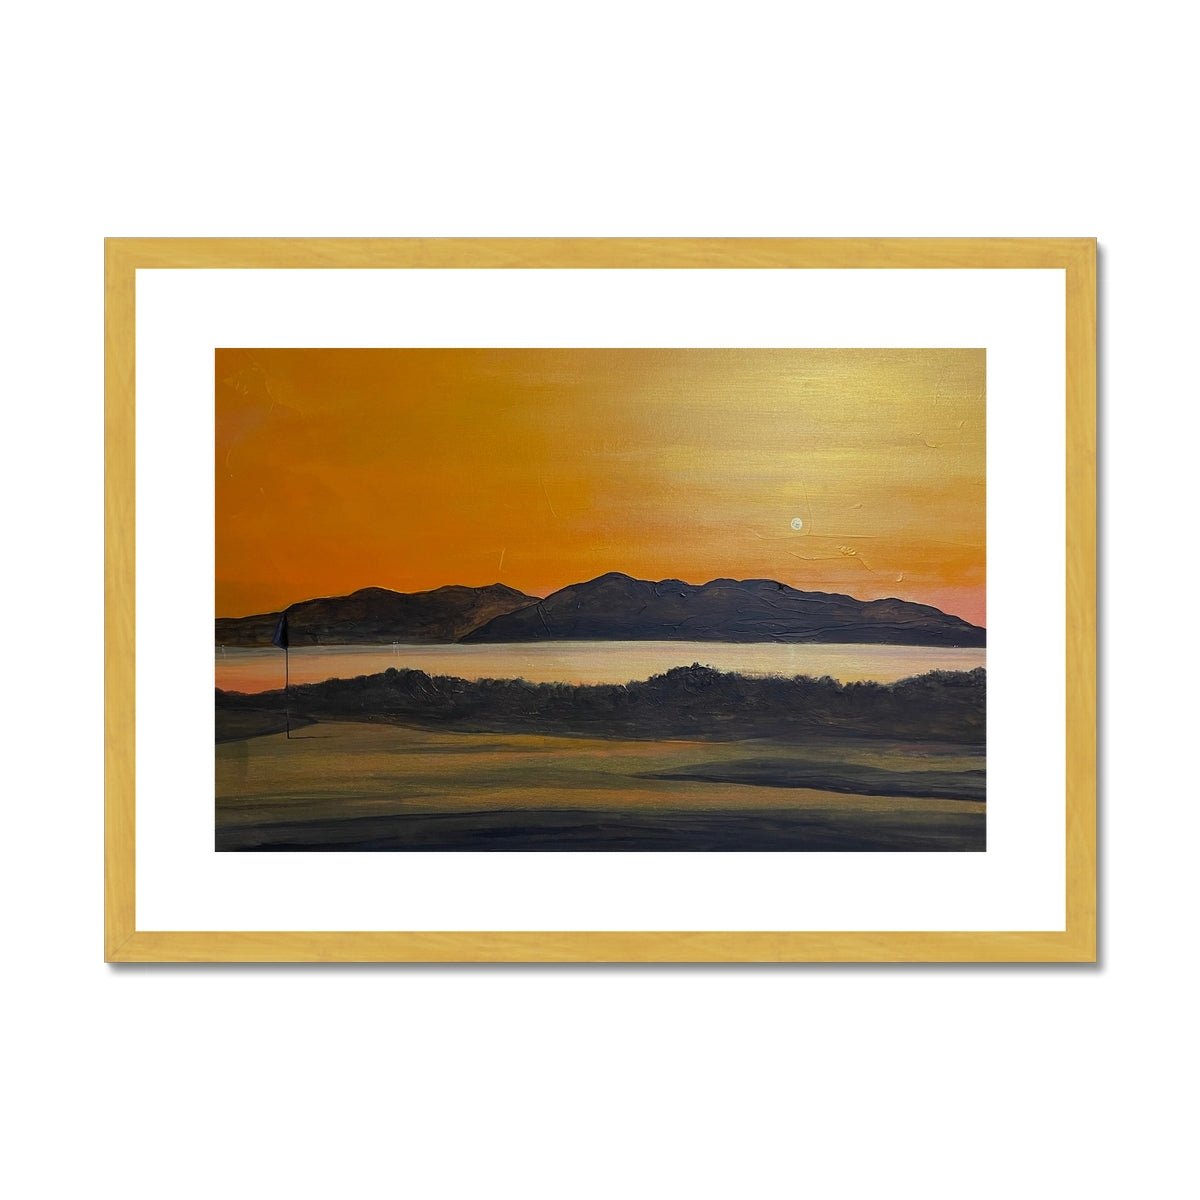 Arran & The 5th Green Royal Troon Golf Course Painting | Antique Framed & Mounted Prints From Scotland-Antique Framed & Mounted Prints-Arran Art Gallery-A2 Landscape-Gold Frame-Paintings, Prints, Homeware, Art Gifts From Scotland By Scottish Artist Kevin Hunter